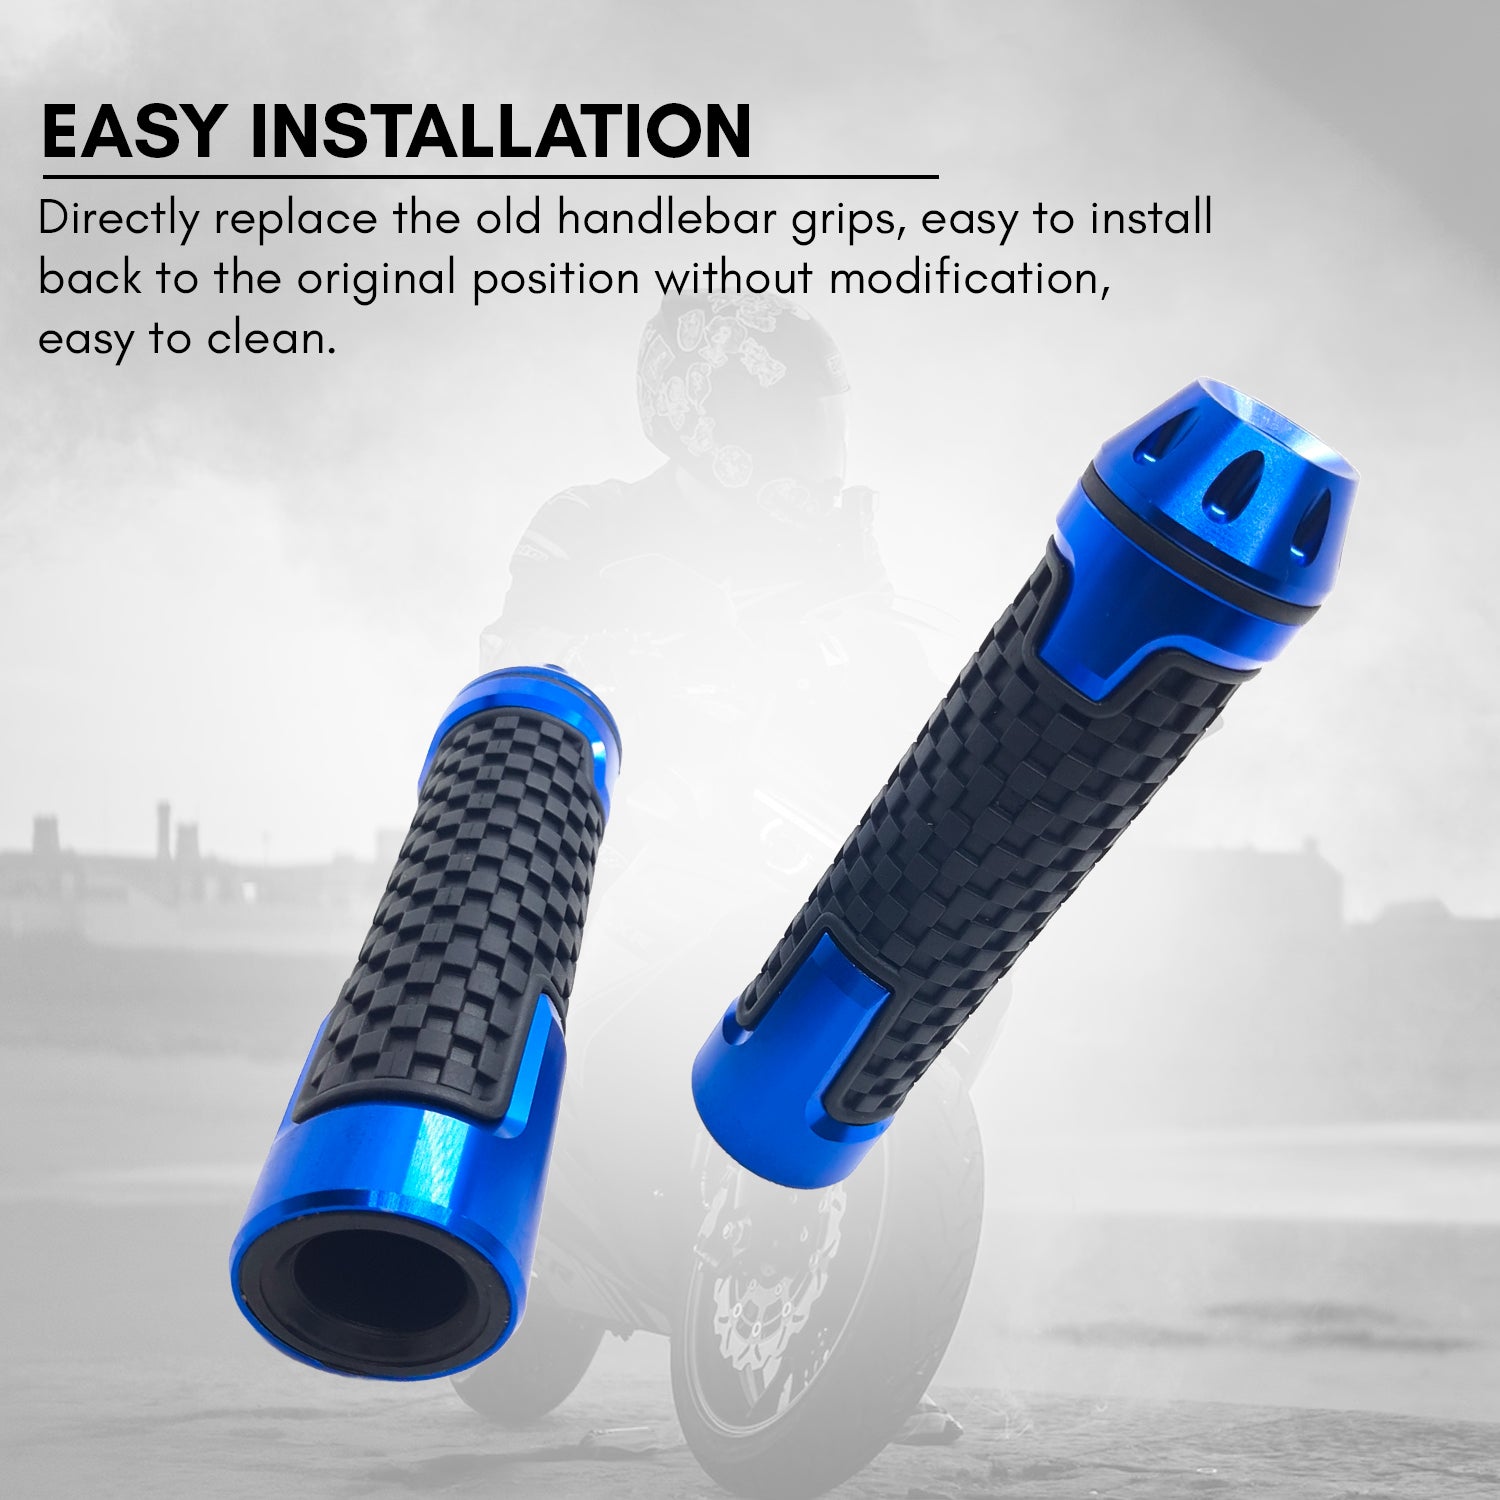 Aluminum and Rubber Motorcycle Grips Non Slip Universal High Strength Handlebar Grip Cover for Motorcycle (Pack of 2, Blue)